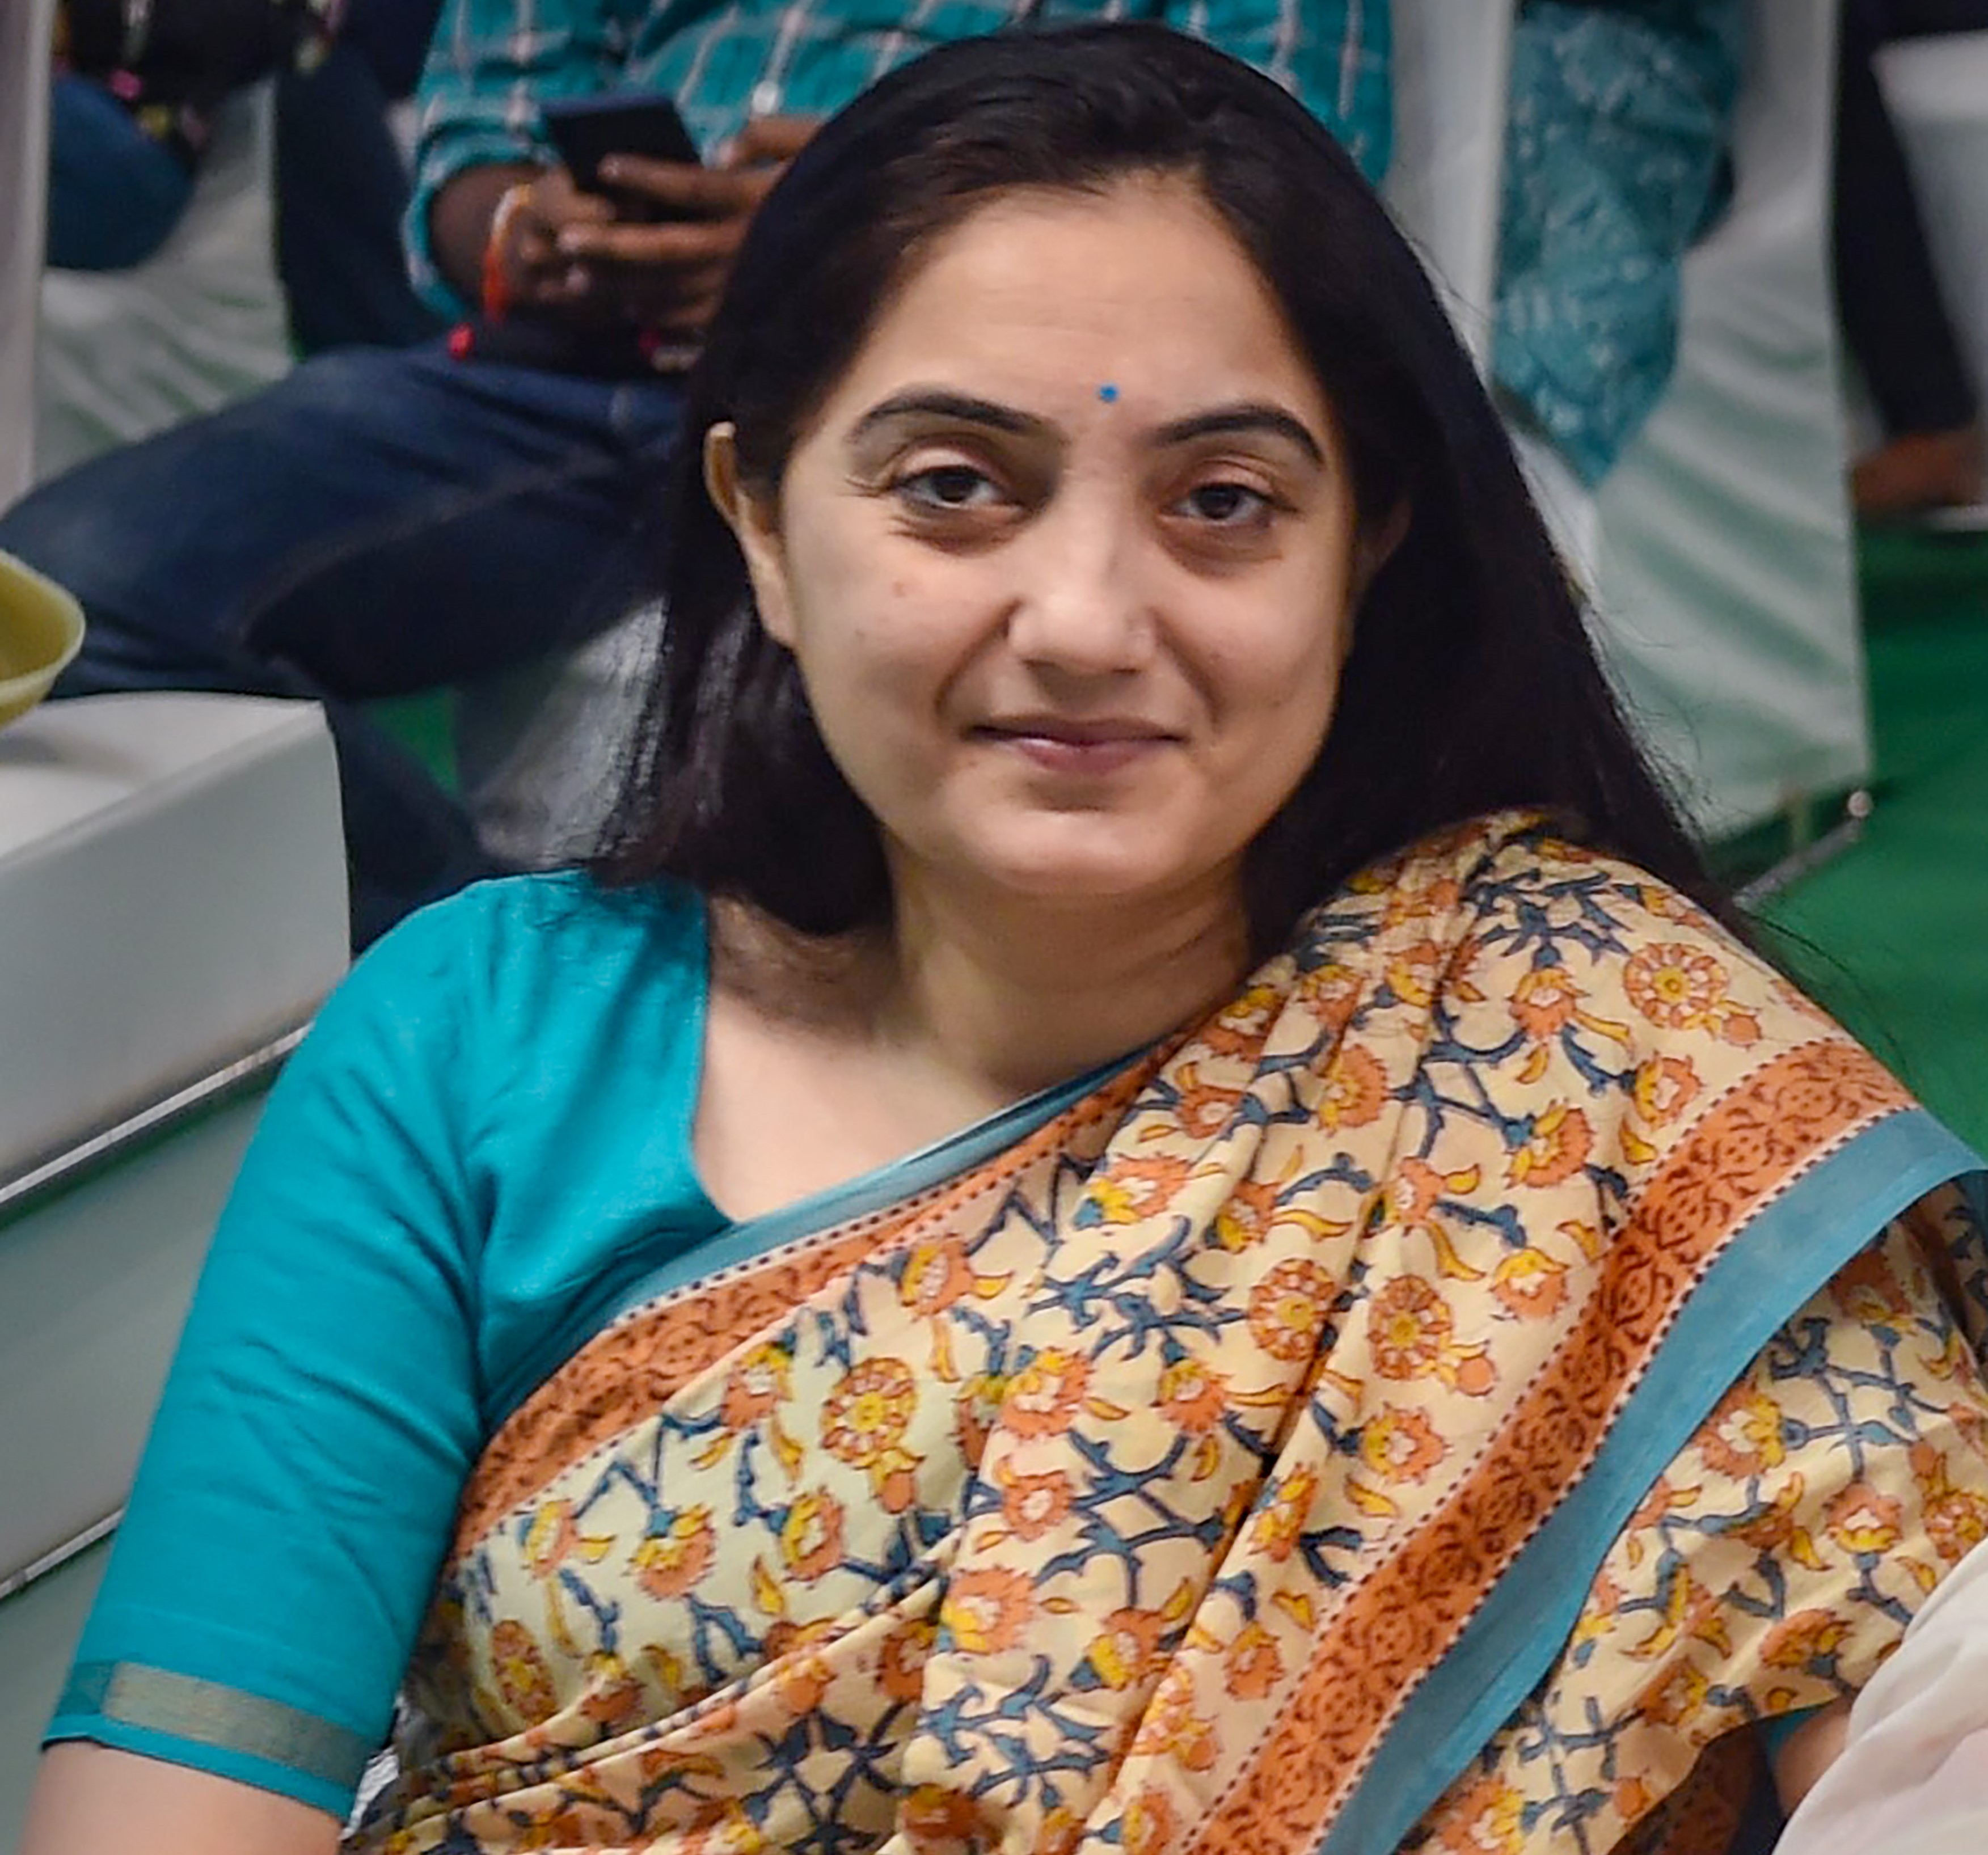 BJP suspends Nupur Sharma for comments on Prophet Mohammed; says party respects all religions